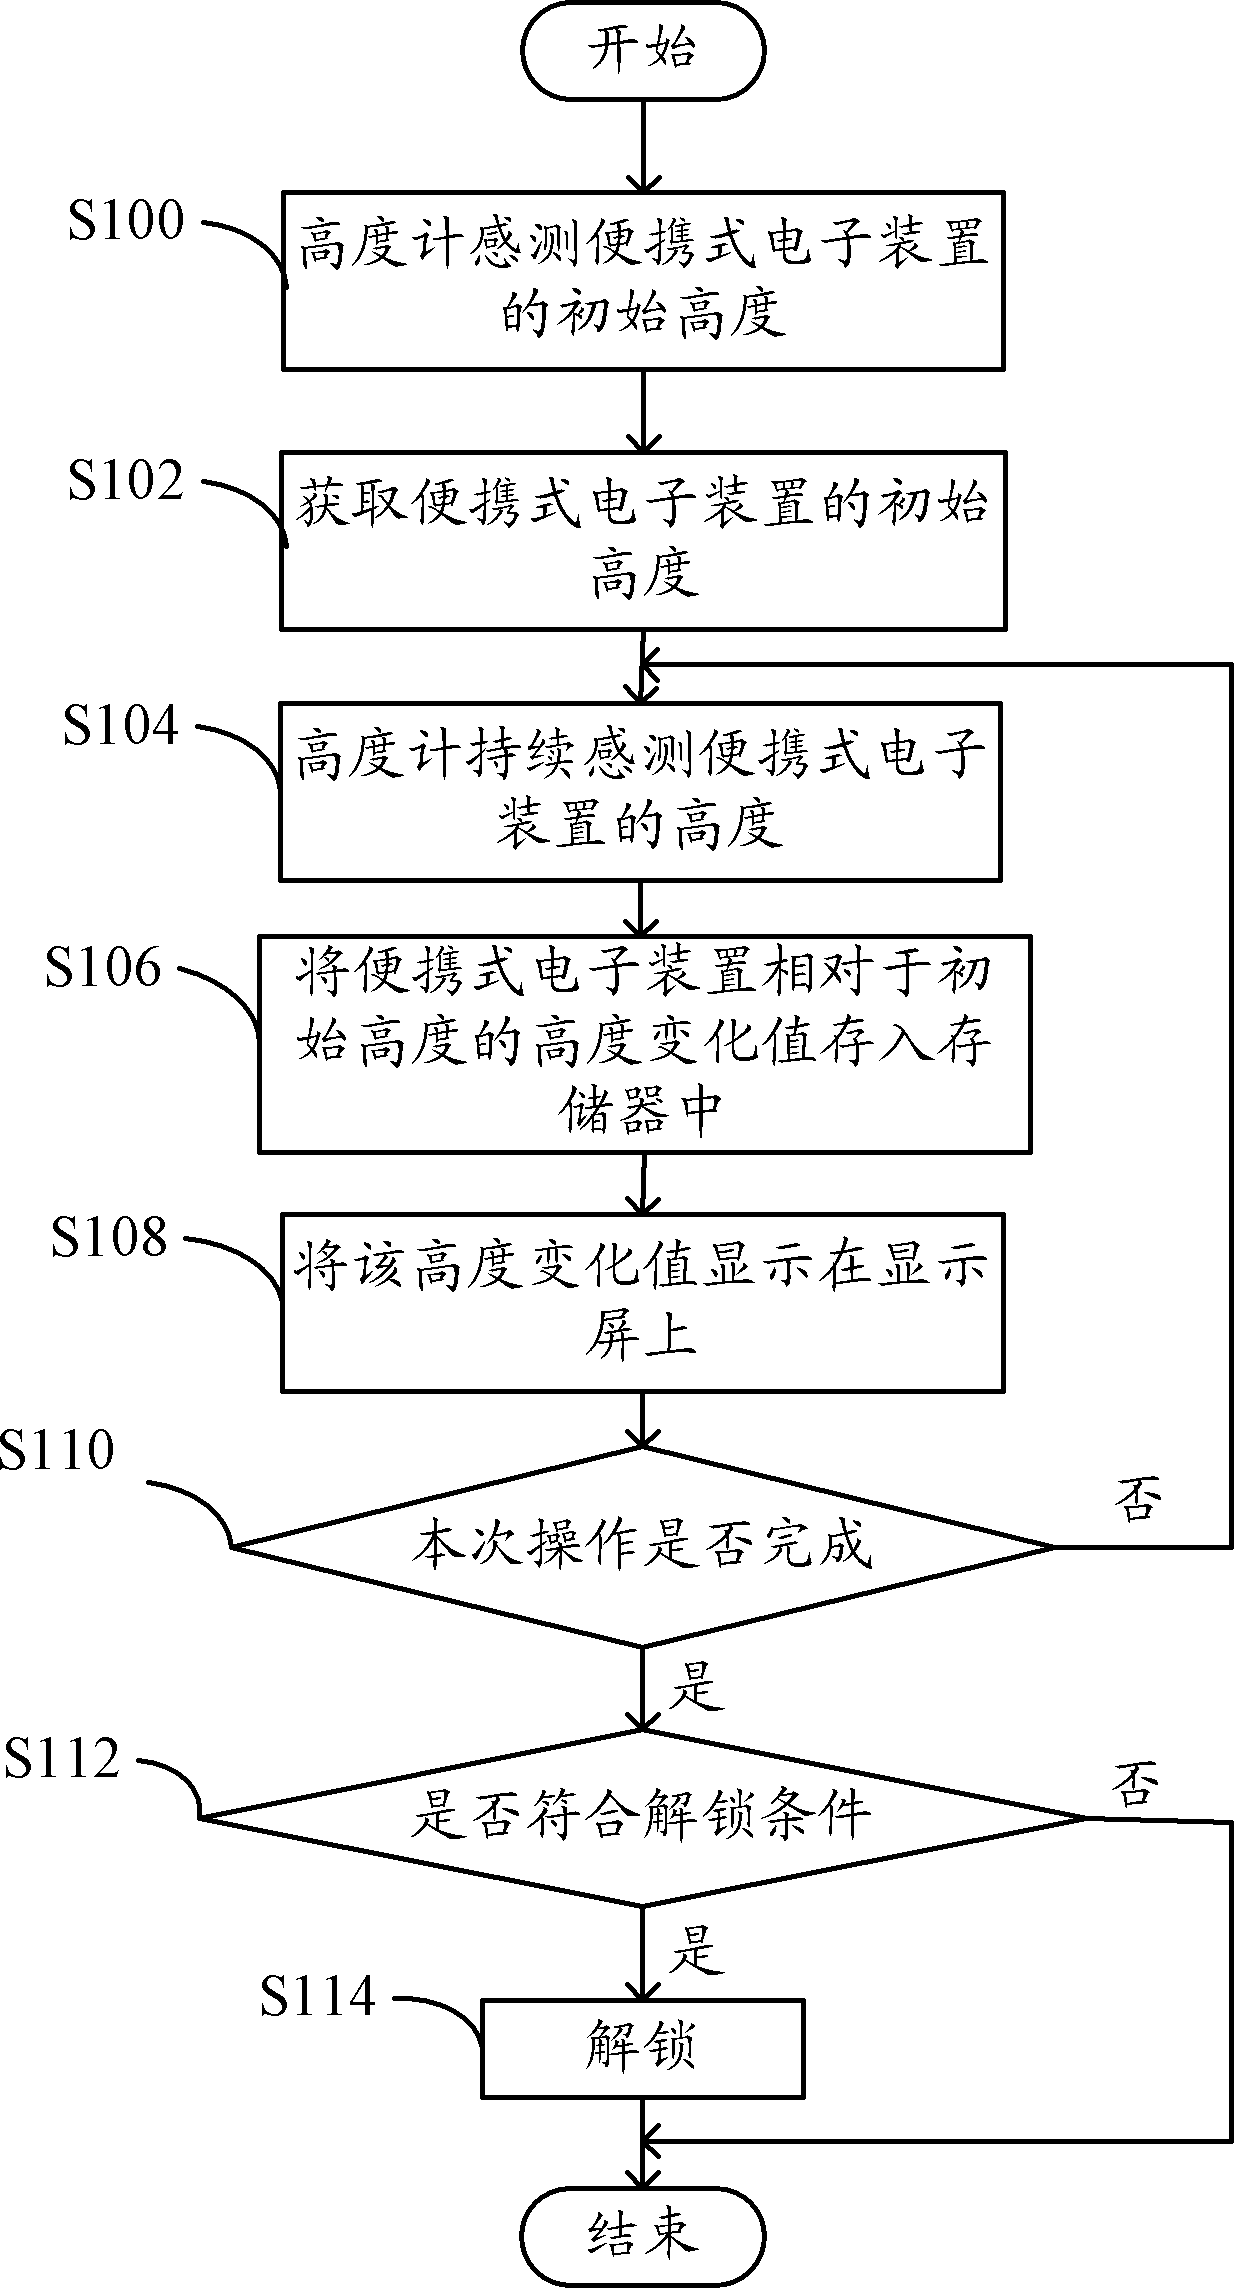 Unlocking system of portable electronic device and method